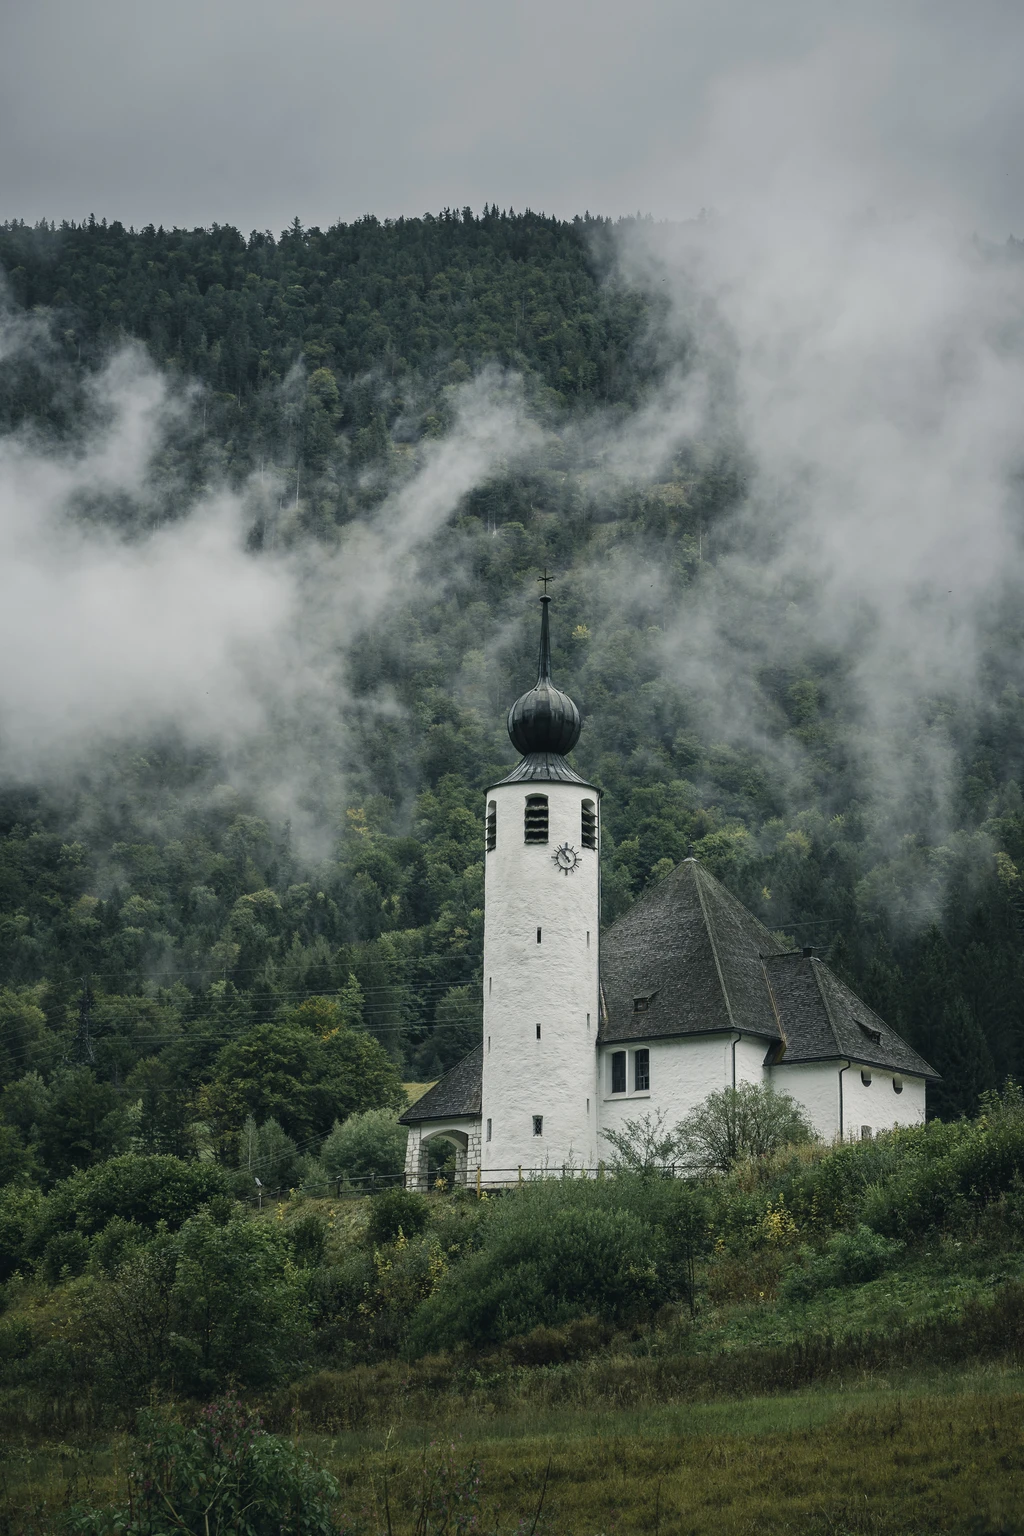 Mountain Church surrounded by mist